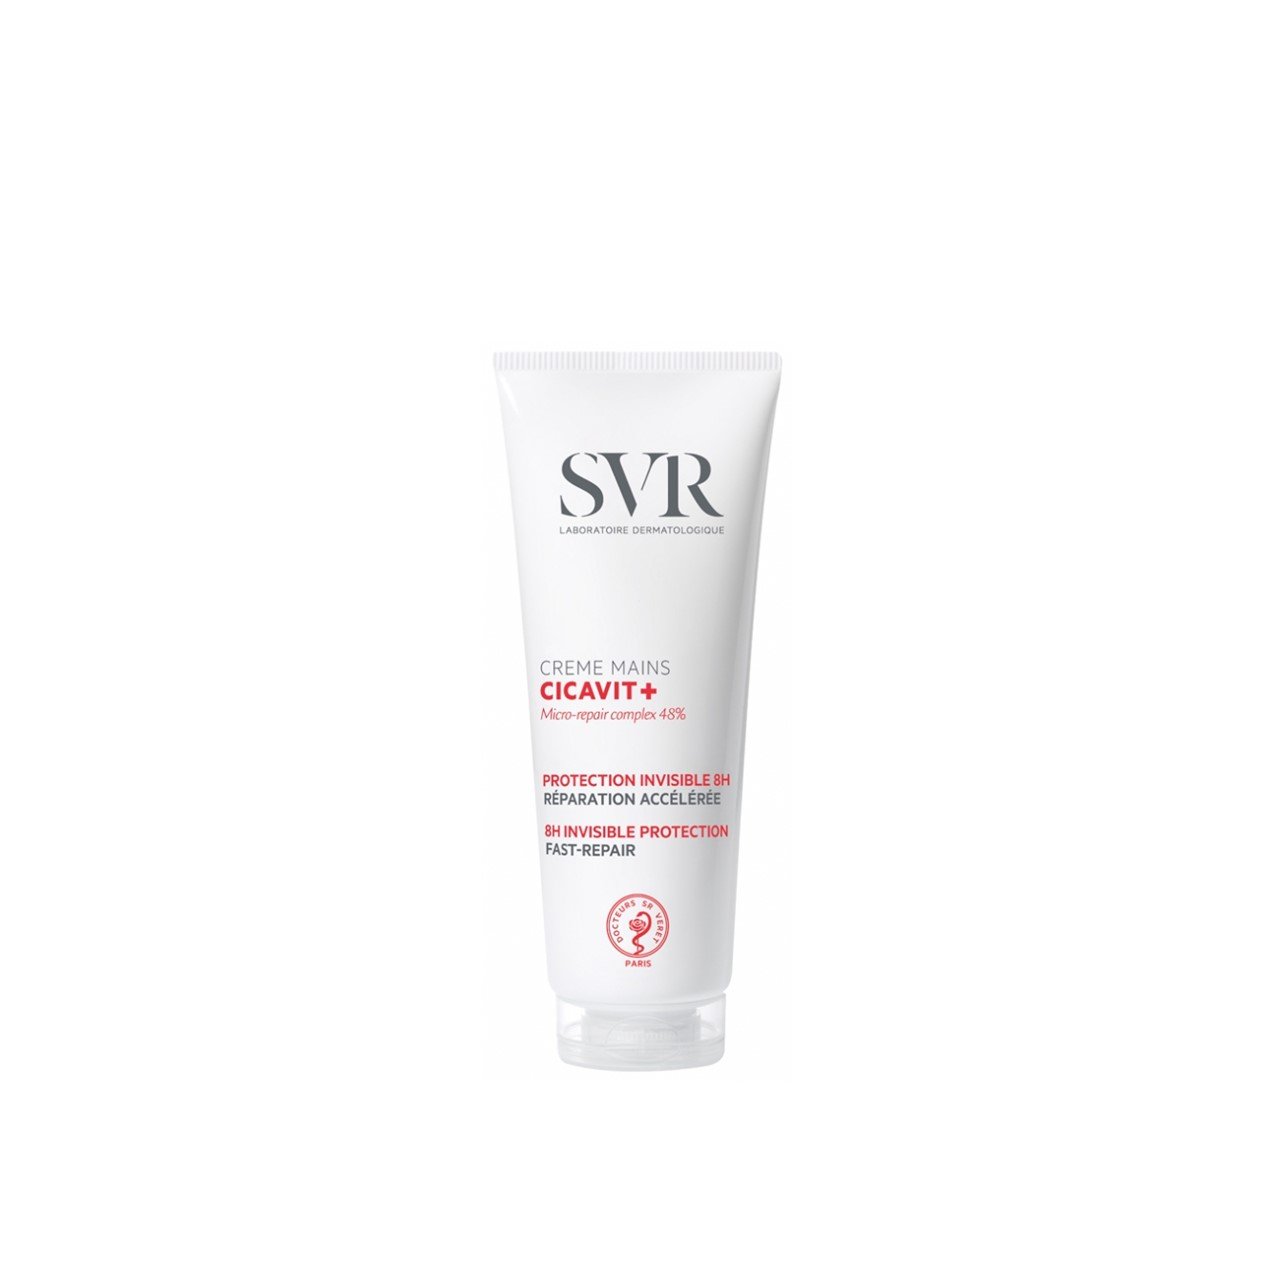 SVR Cicavit+ 8h Invisible Protection Fast-Repair Hand Cream 75g (2.65oz)